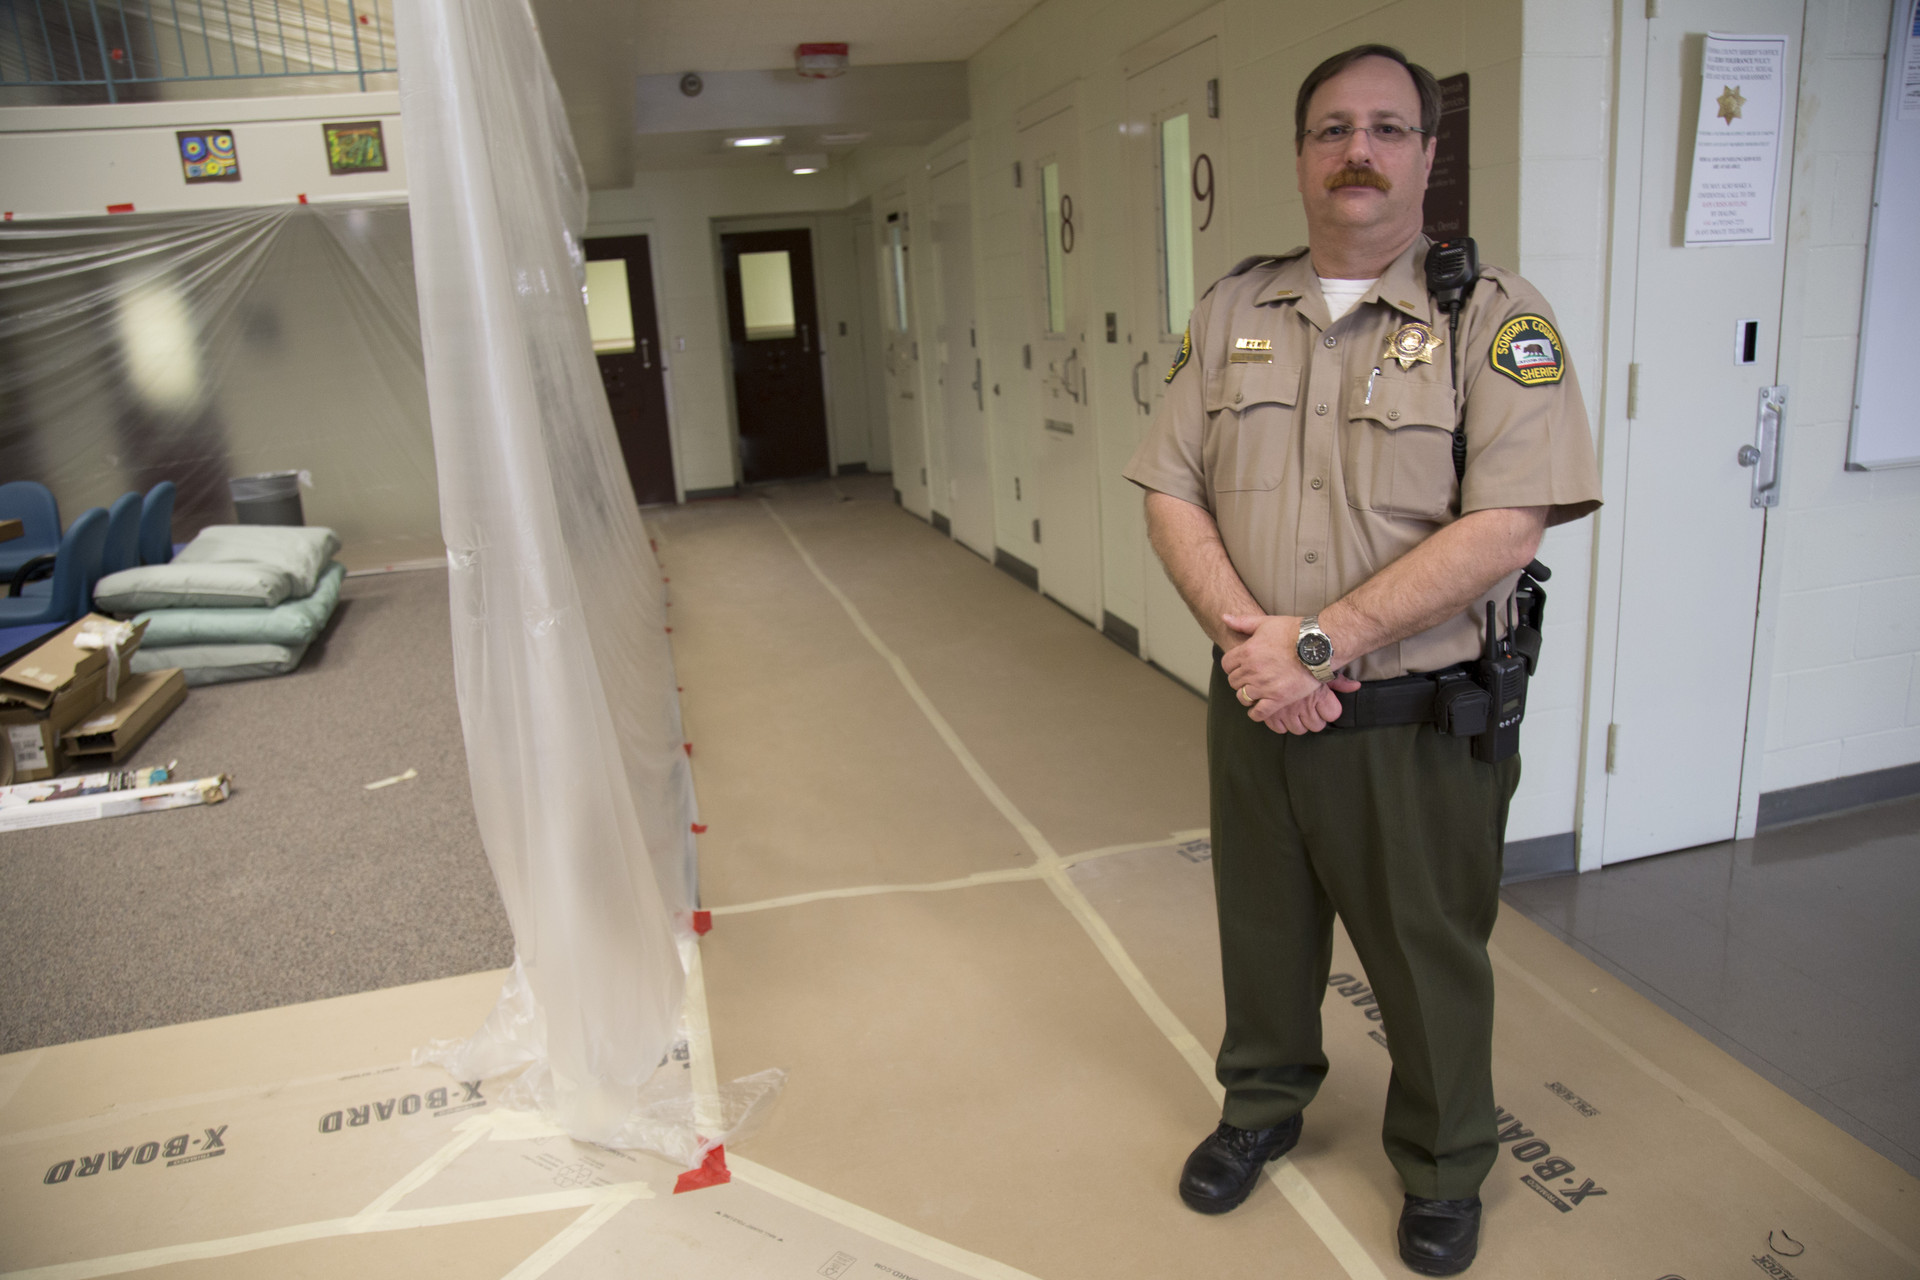 Lt. Mike Toby supervises Sonoma County Main Jail’s three mental health units. He's standing in a unit being renovated to give inmates more outside of cell time.